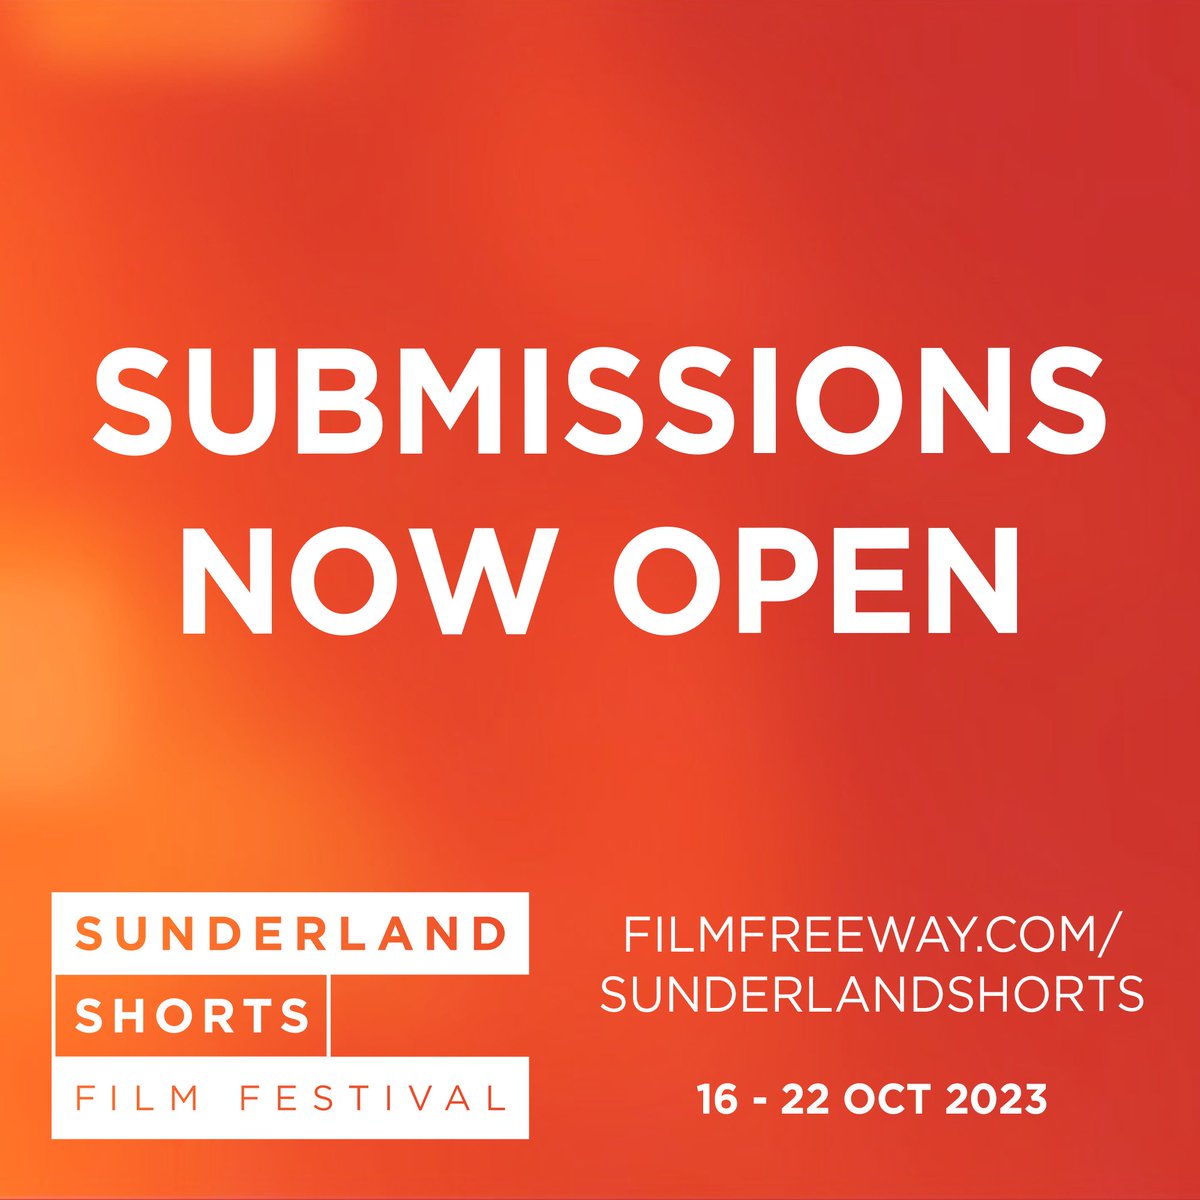 🚨 CALLING ALL FILMMAKERS! 🚨 Submissions are now open for the 8th edition of Sunderland Shorts Film Festival! Want to be part of the action? Find out more and submit today @ Filmfreeway.com/SunderlandShor…